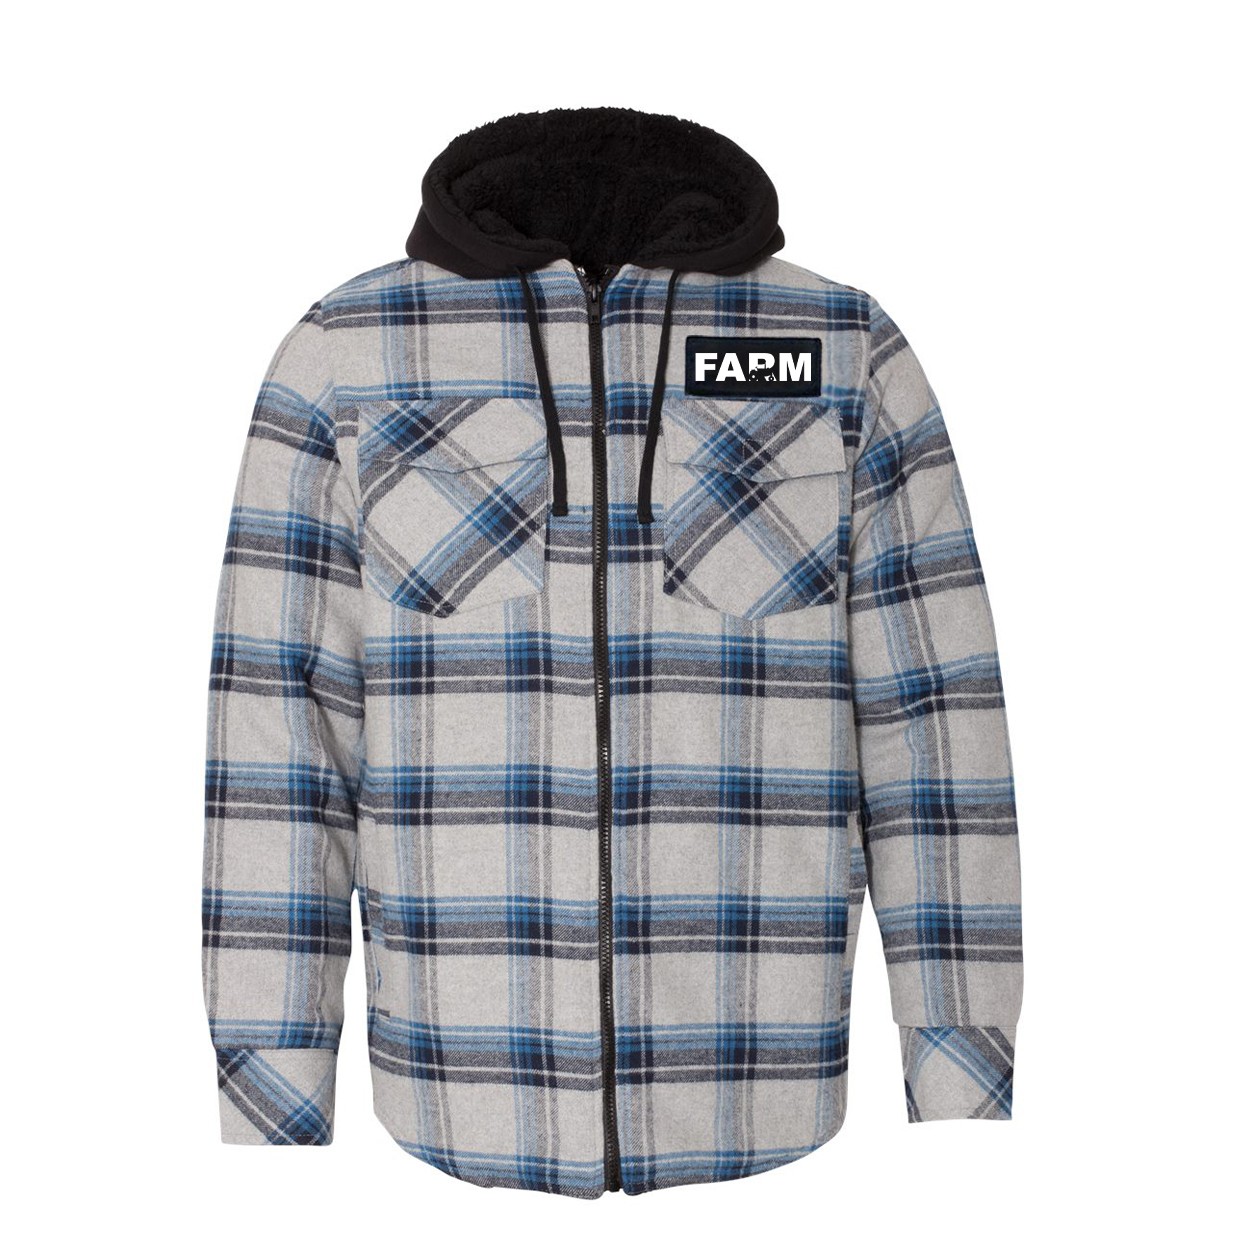 Farm Tractor Logo Classic Unisex Full Zip Woven Patch Hooded Flannel Jacket Gray/ Blue